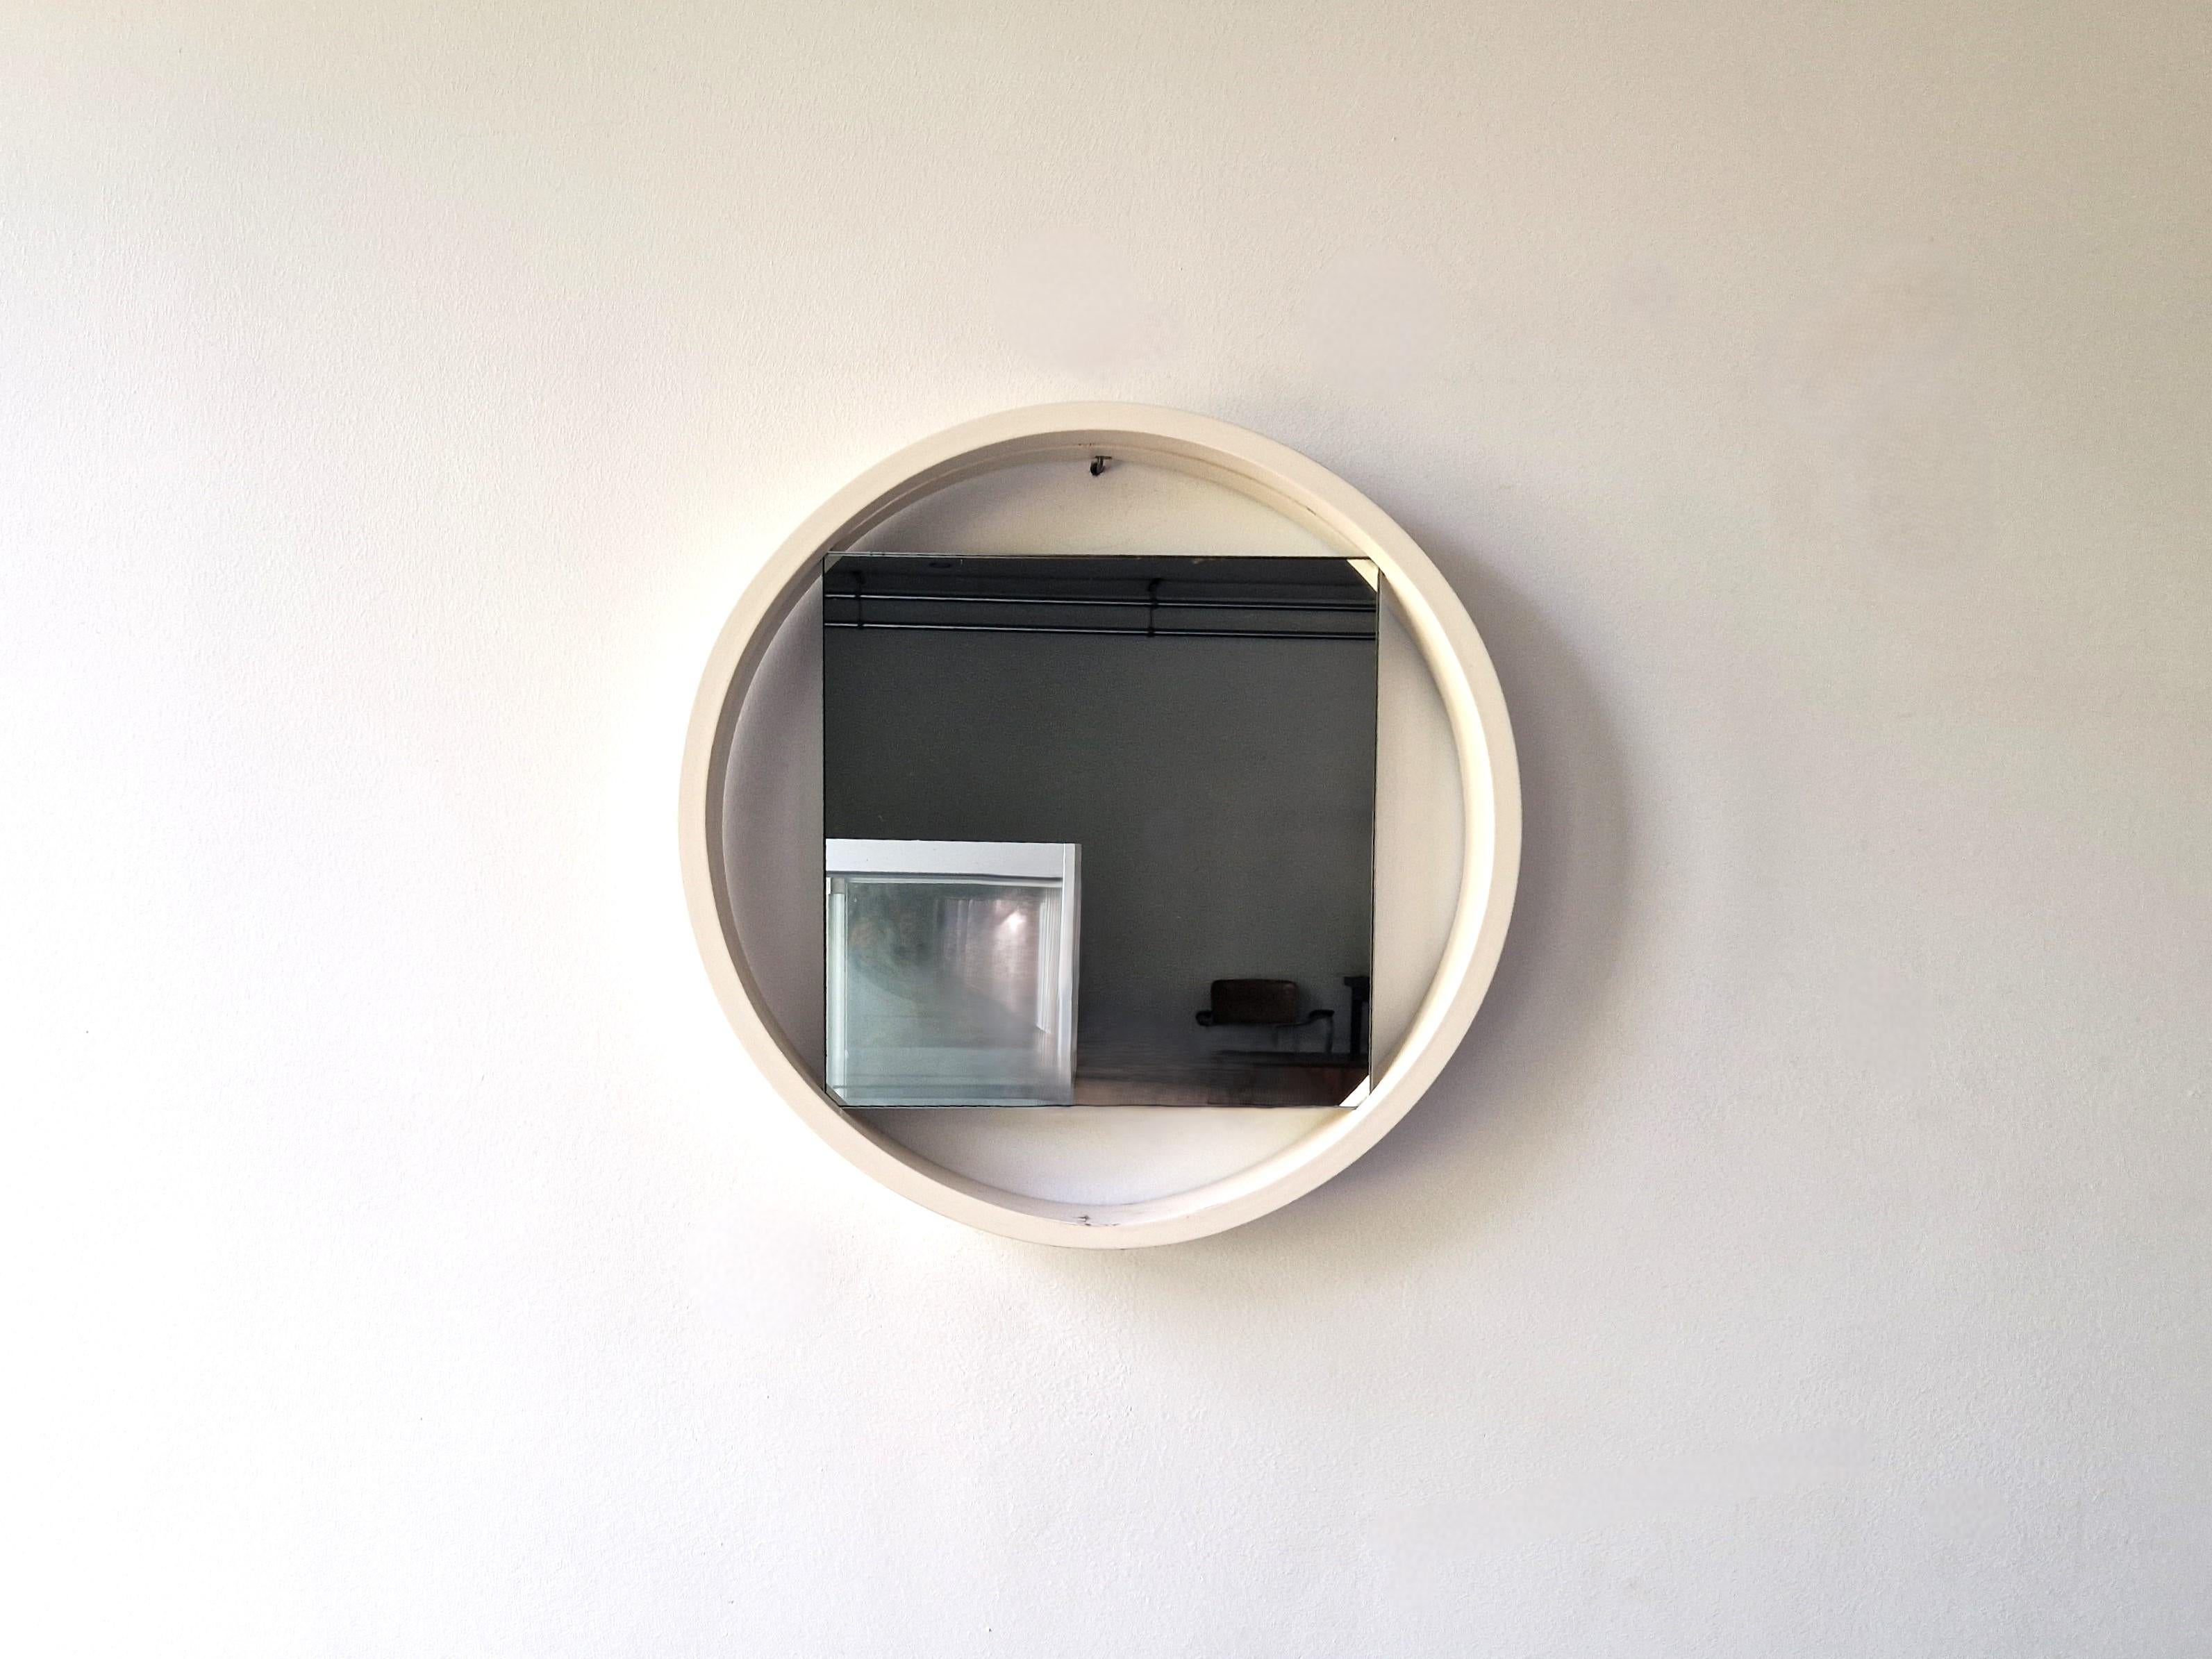 This mirror, model DZ84, was designed by Benno Premsela for 't Spectrum. A minimalistic and very exciting design. The contrast and playfulness of the round frame and the square mirror make this an icon of Dutch design. This design is from 1956 and